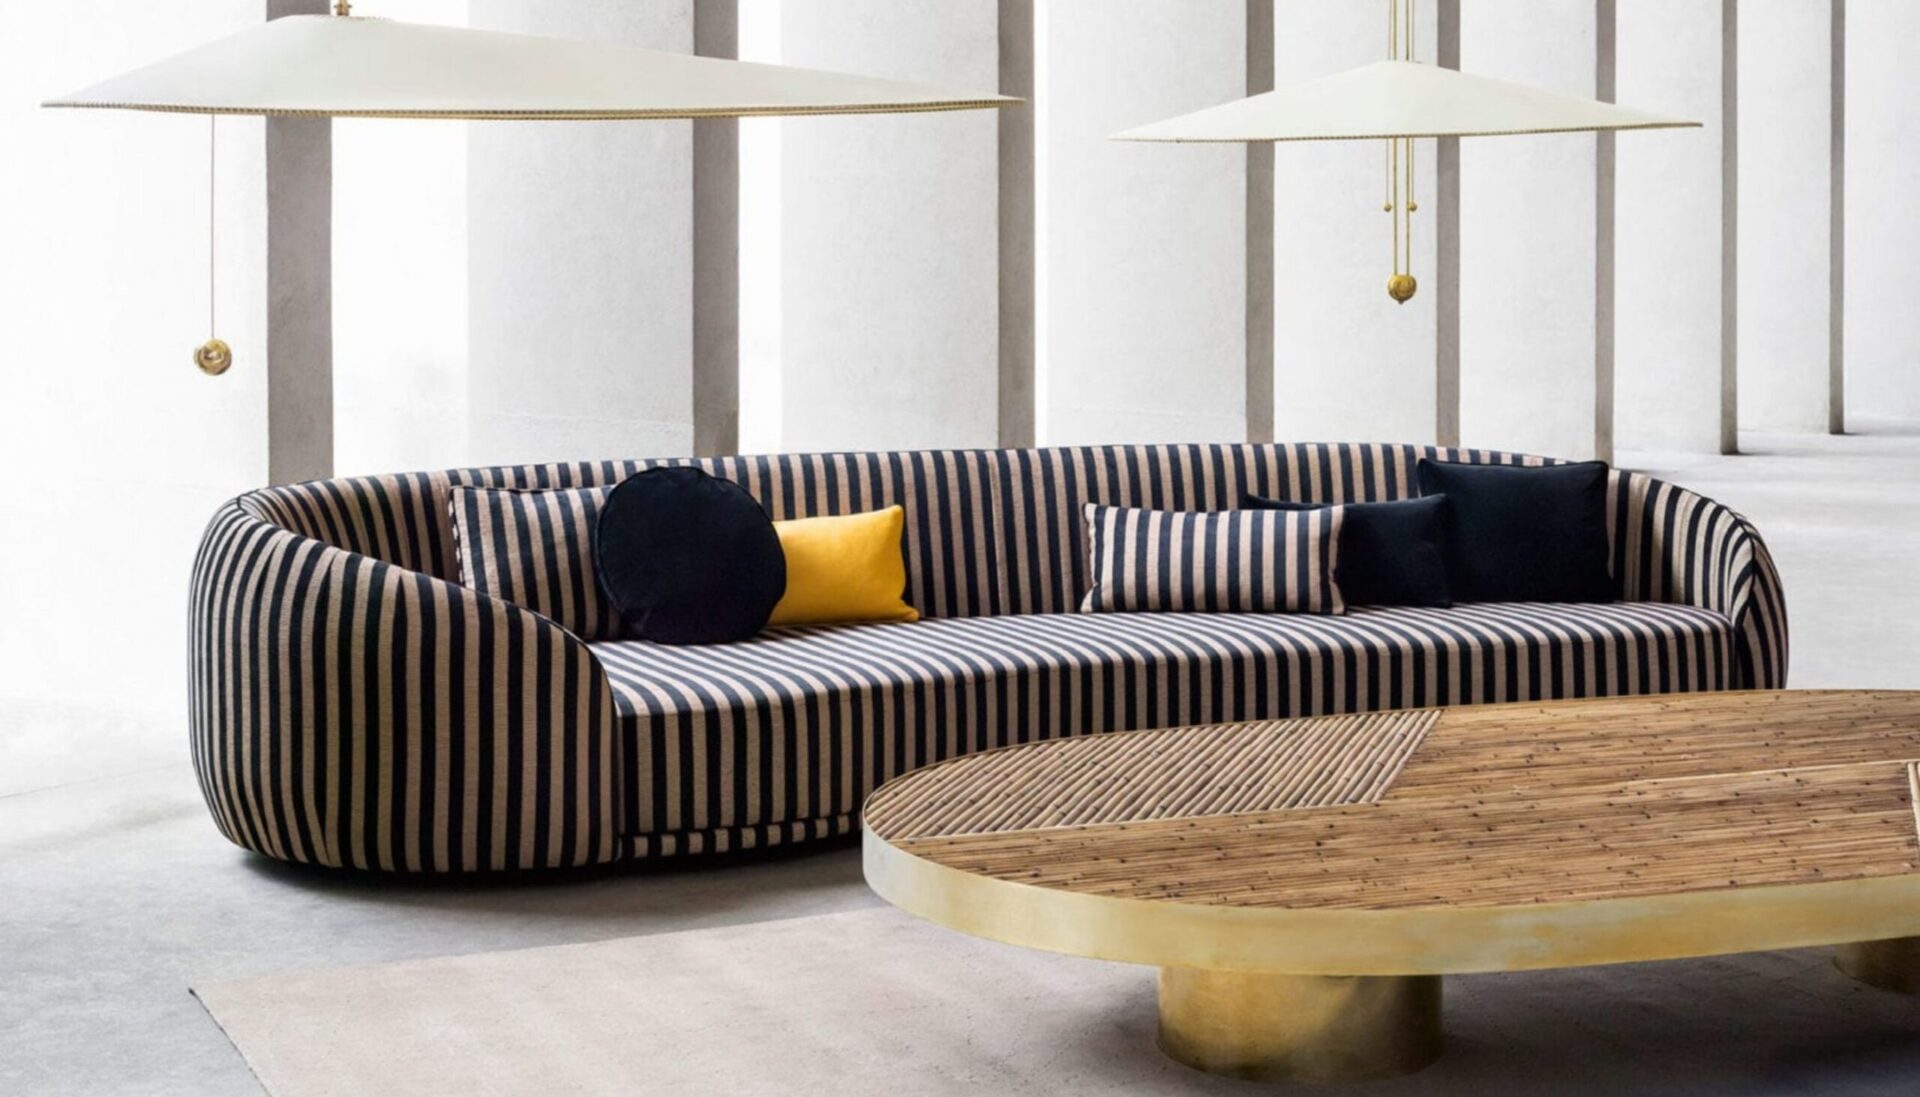 Curved Sofas You'll Love - Welcome! Collection Sofa by CHIARA ANDREATTI FOR FENDI